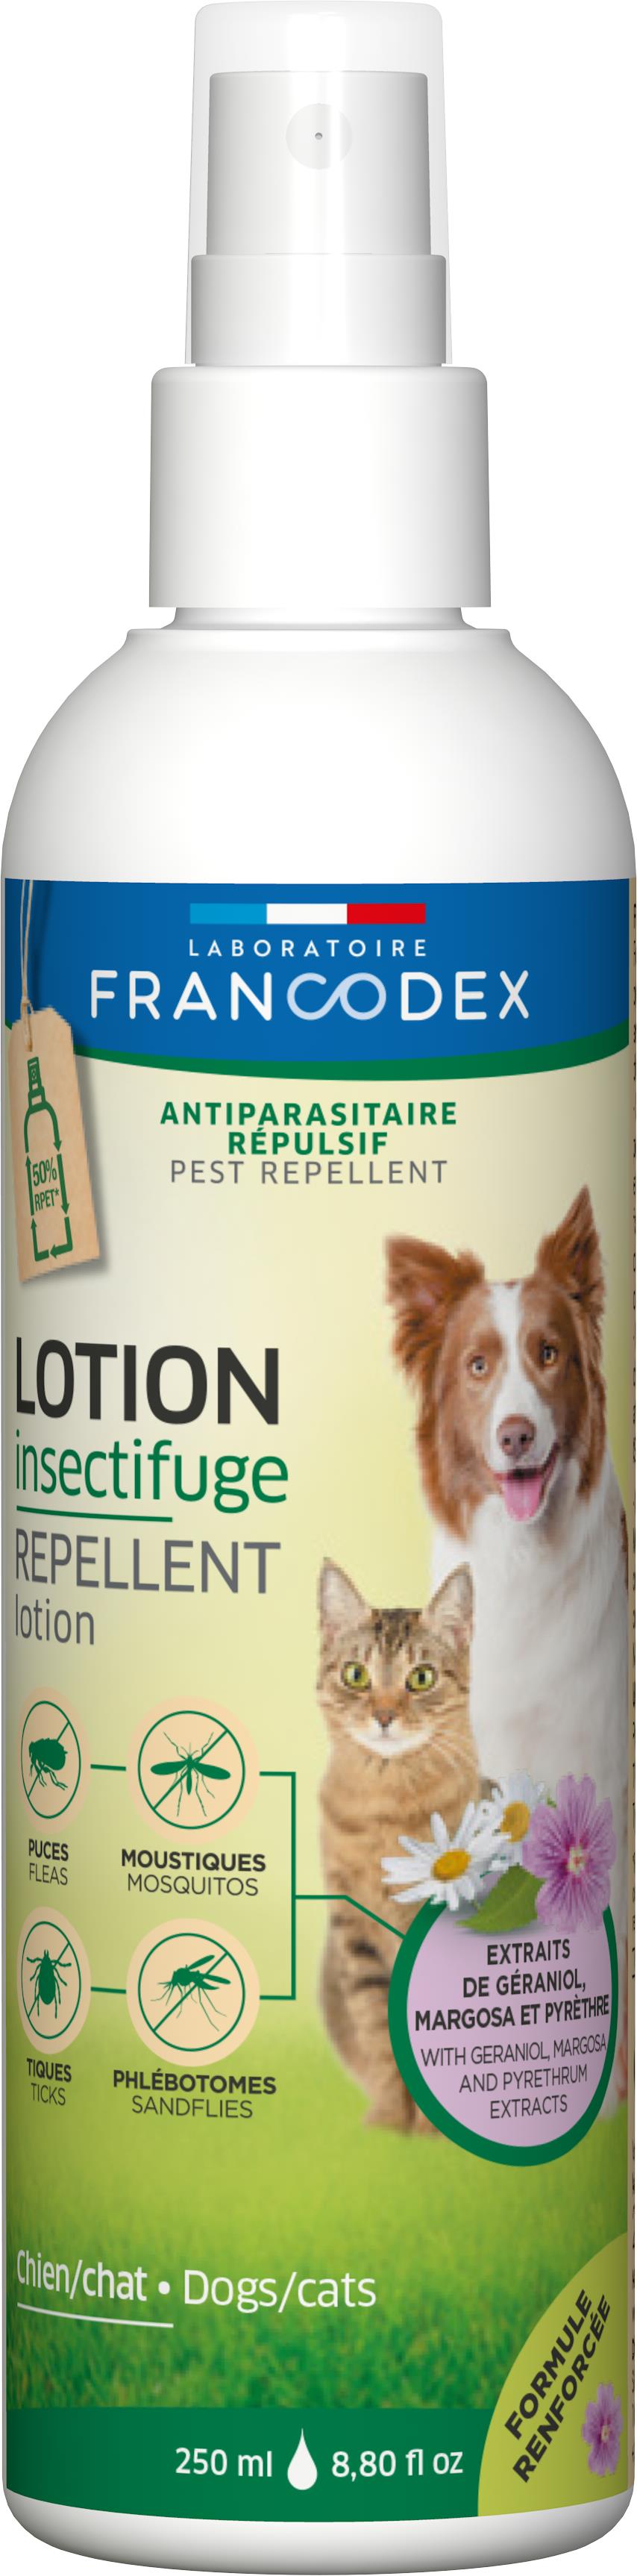 soin - francodex lotion antiparasitaire insectifuge pour chiens et chats - 250 ml